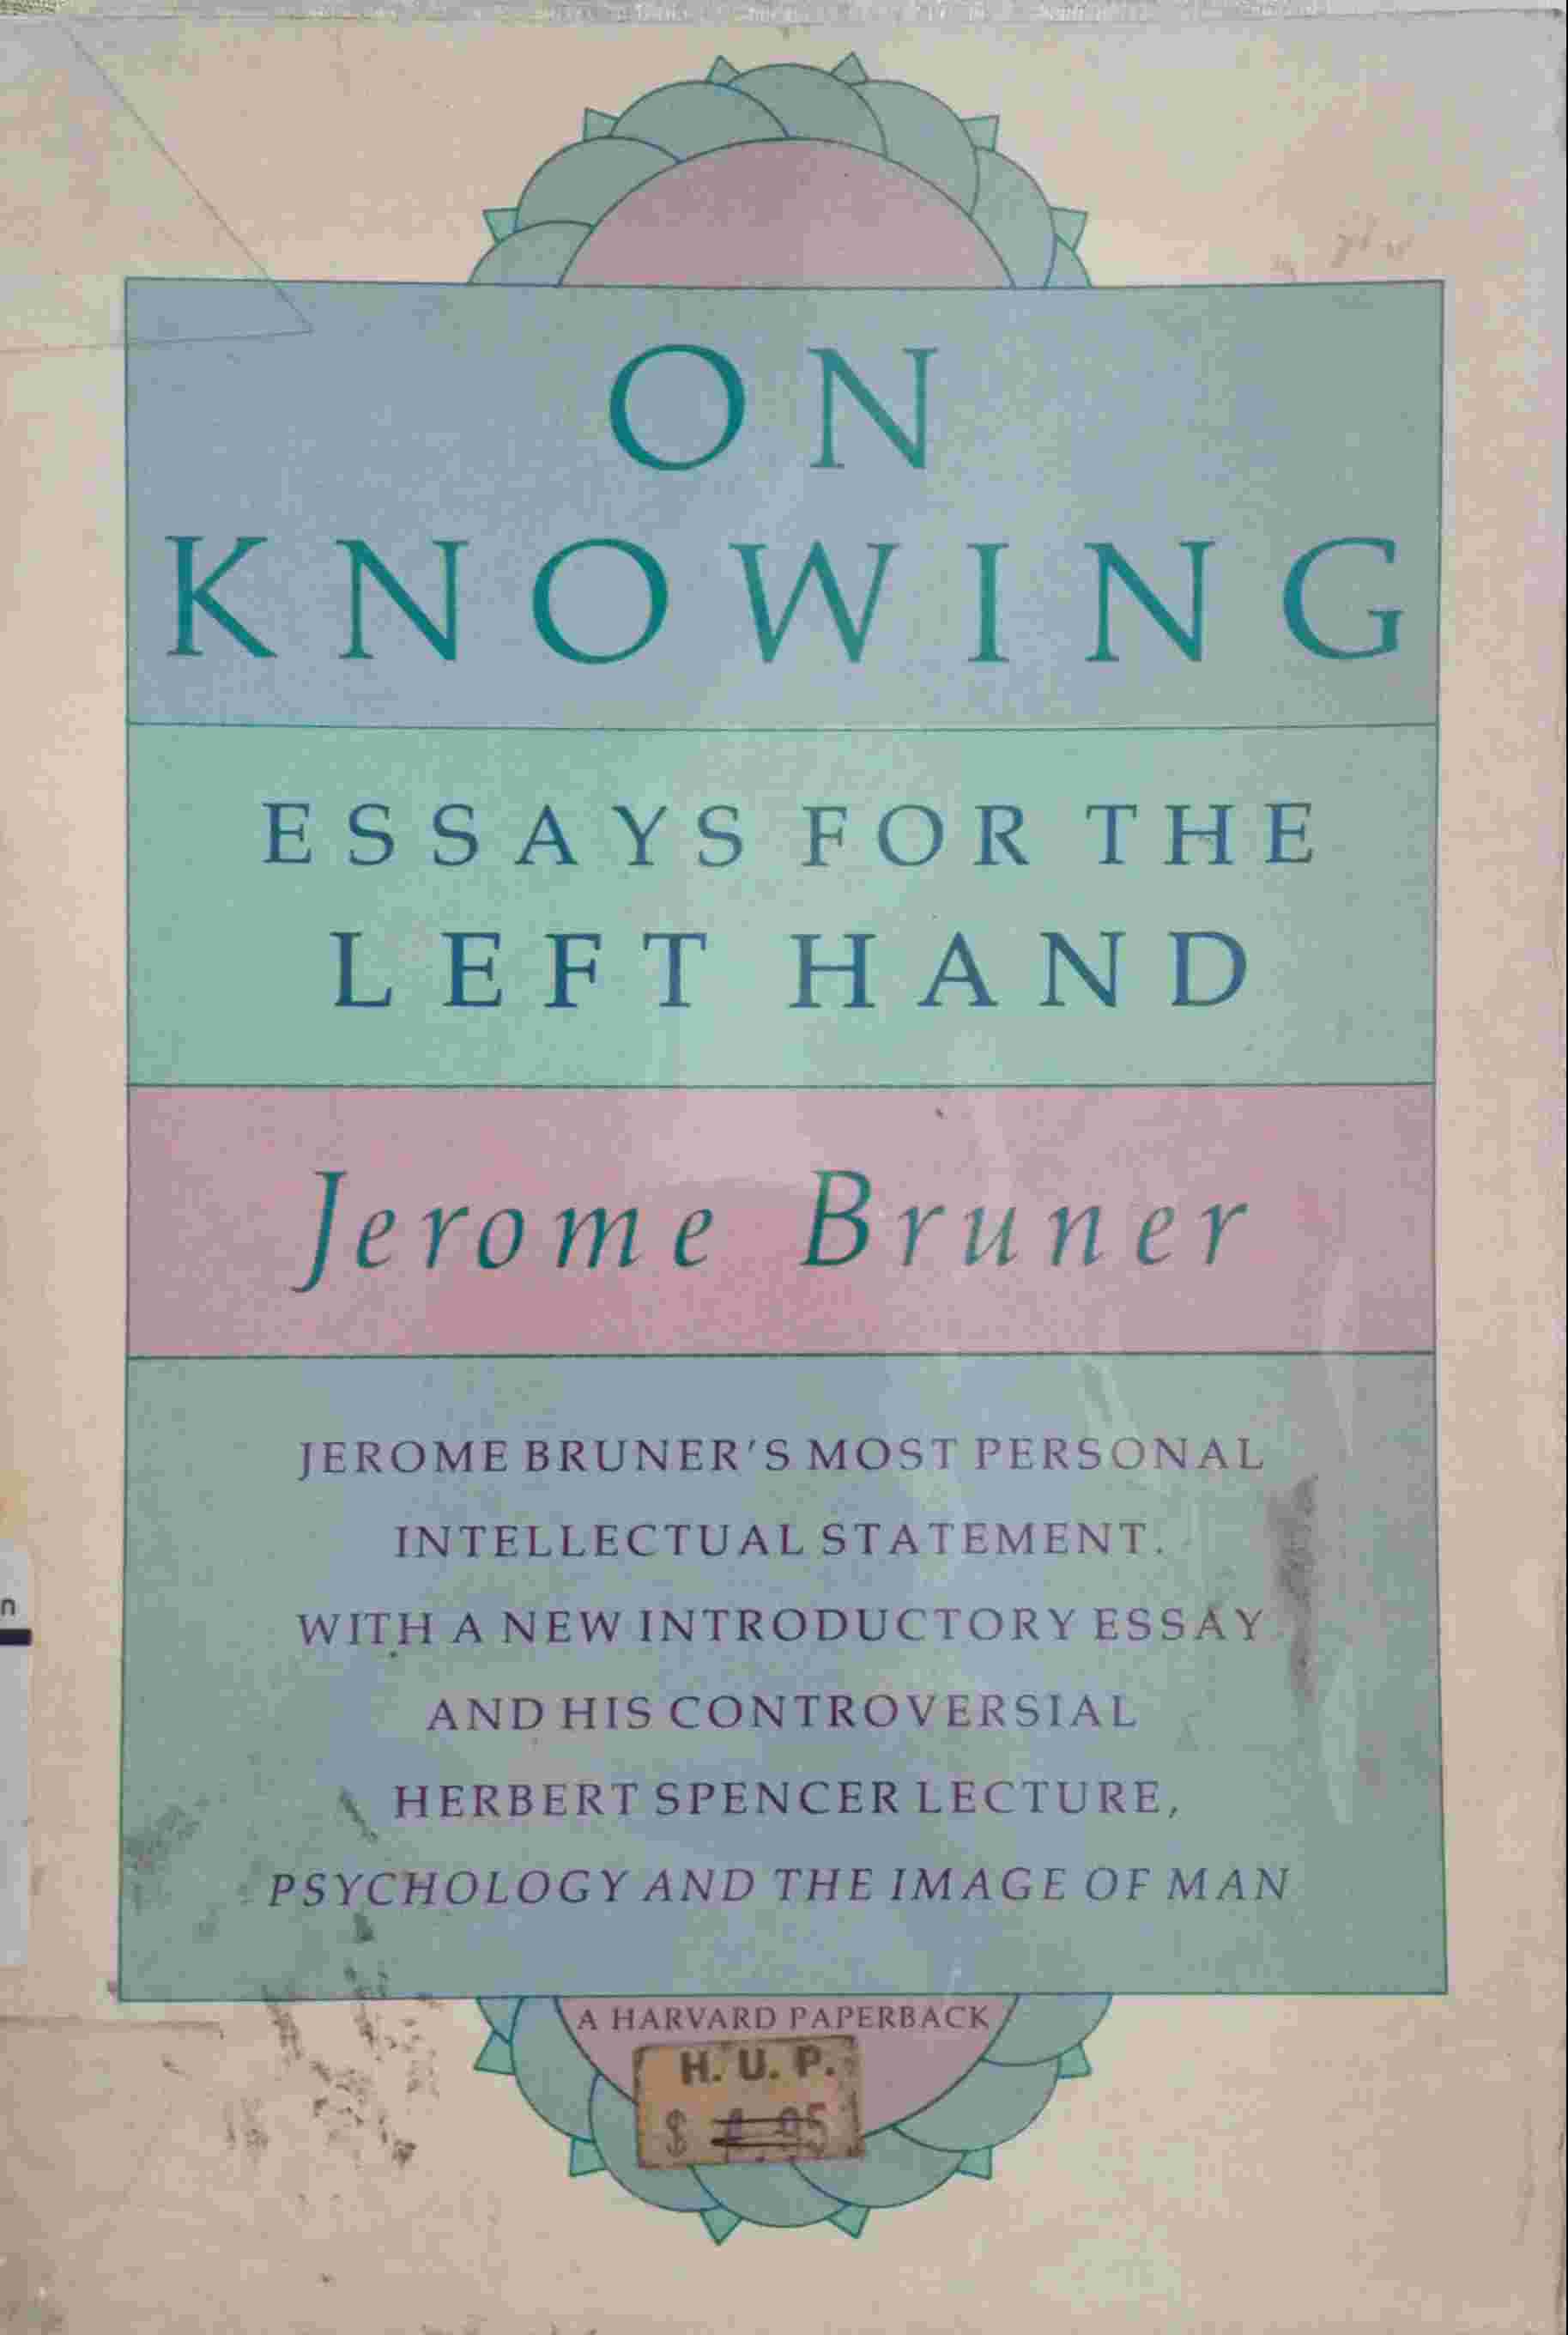 ON KNOWING ESSAYS FOR THE LEFT HAND